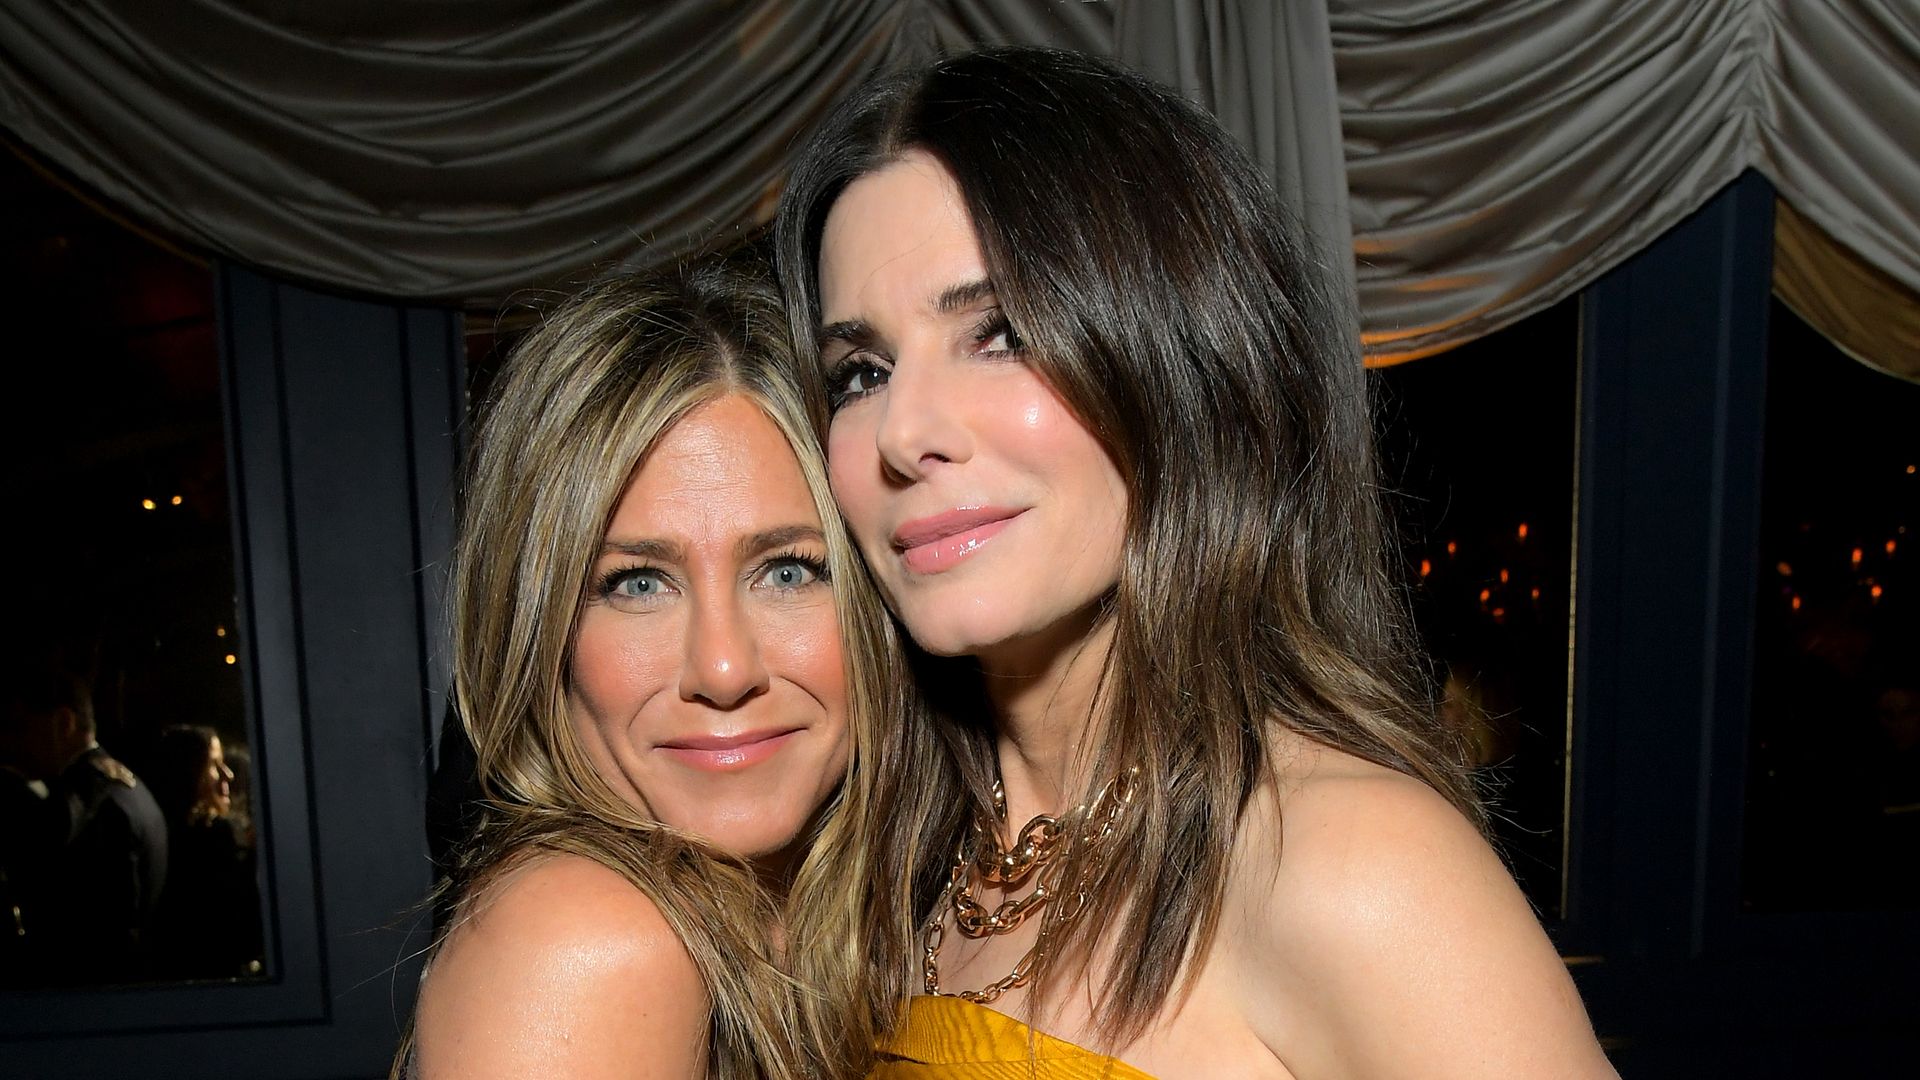 Jennifer Aniston and Sandra Bullock attend the Netflix 2020 Golden Globes After Party on January 05, 2020 in Los Angeles, California